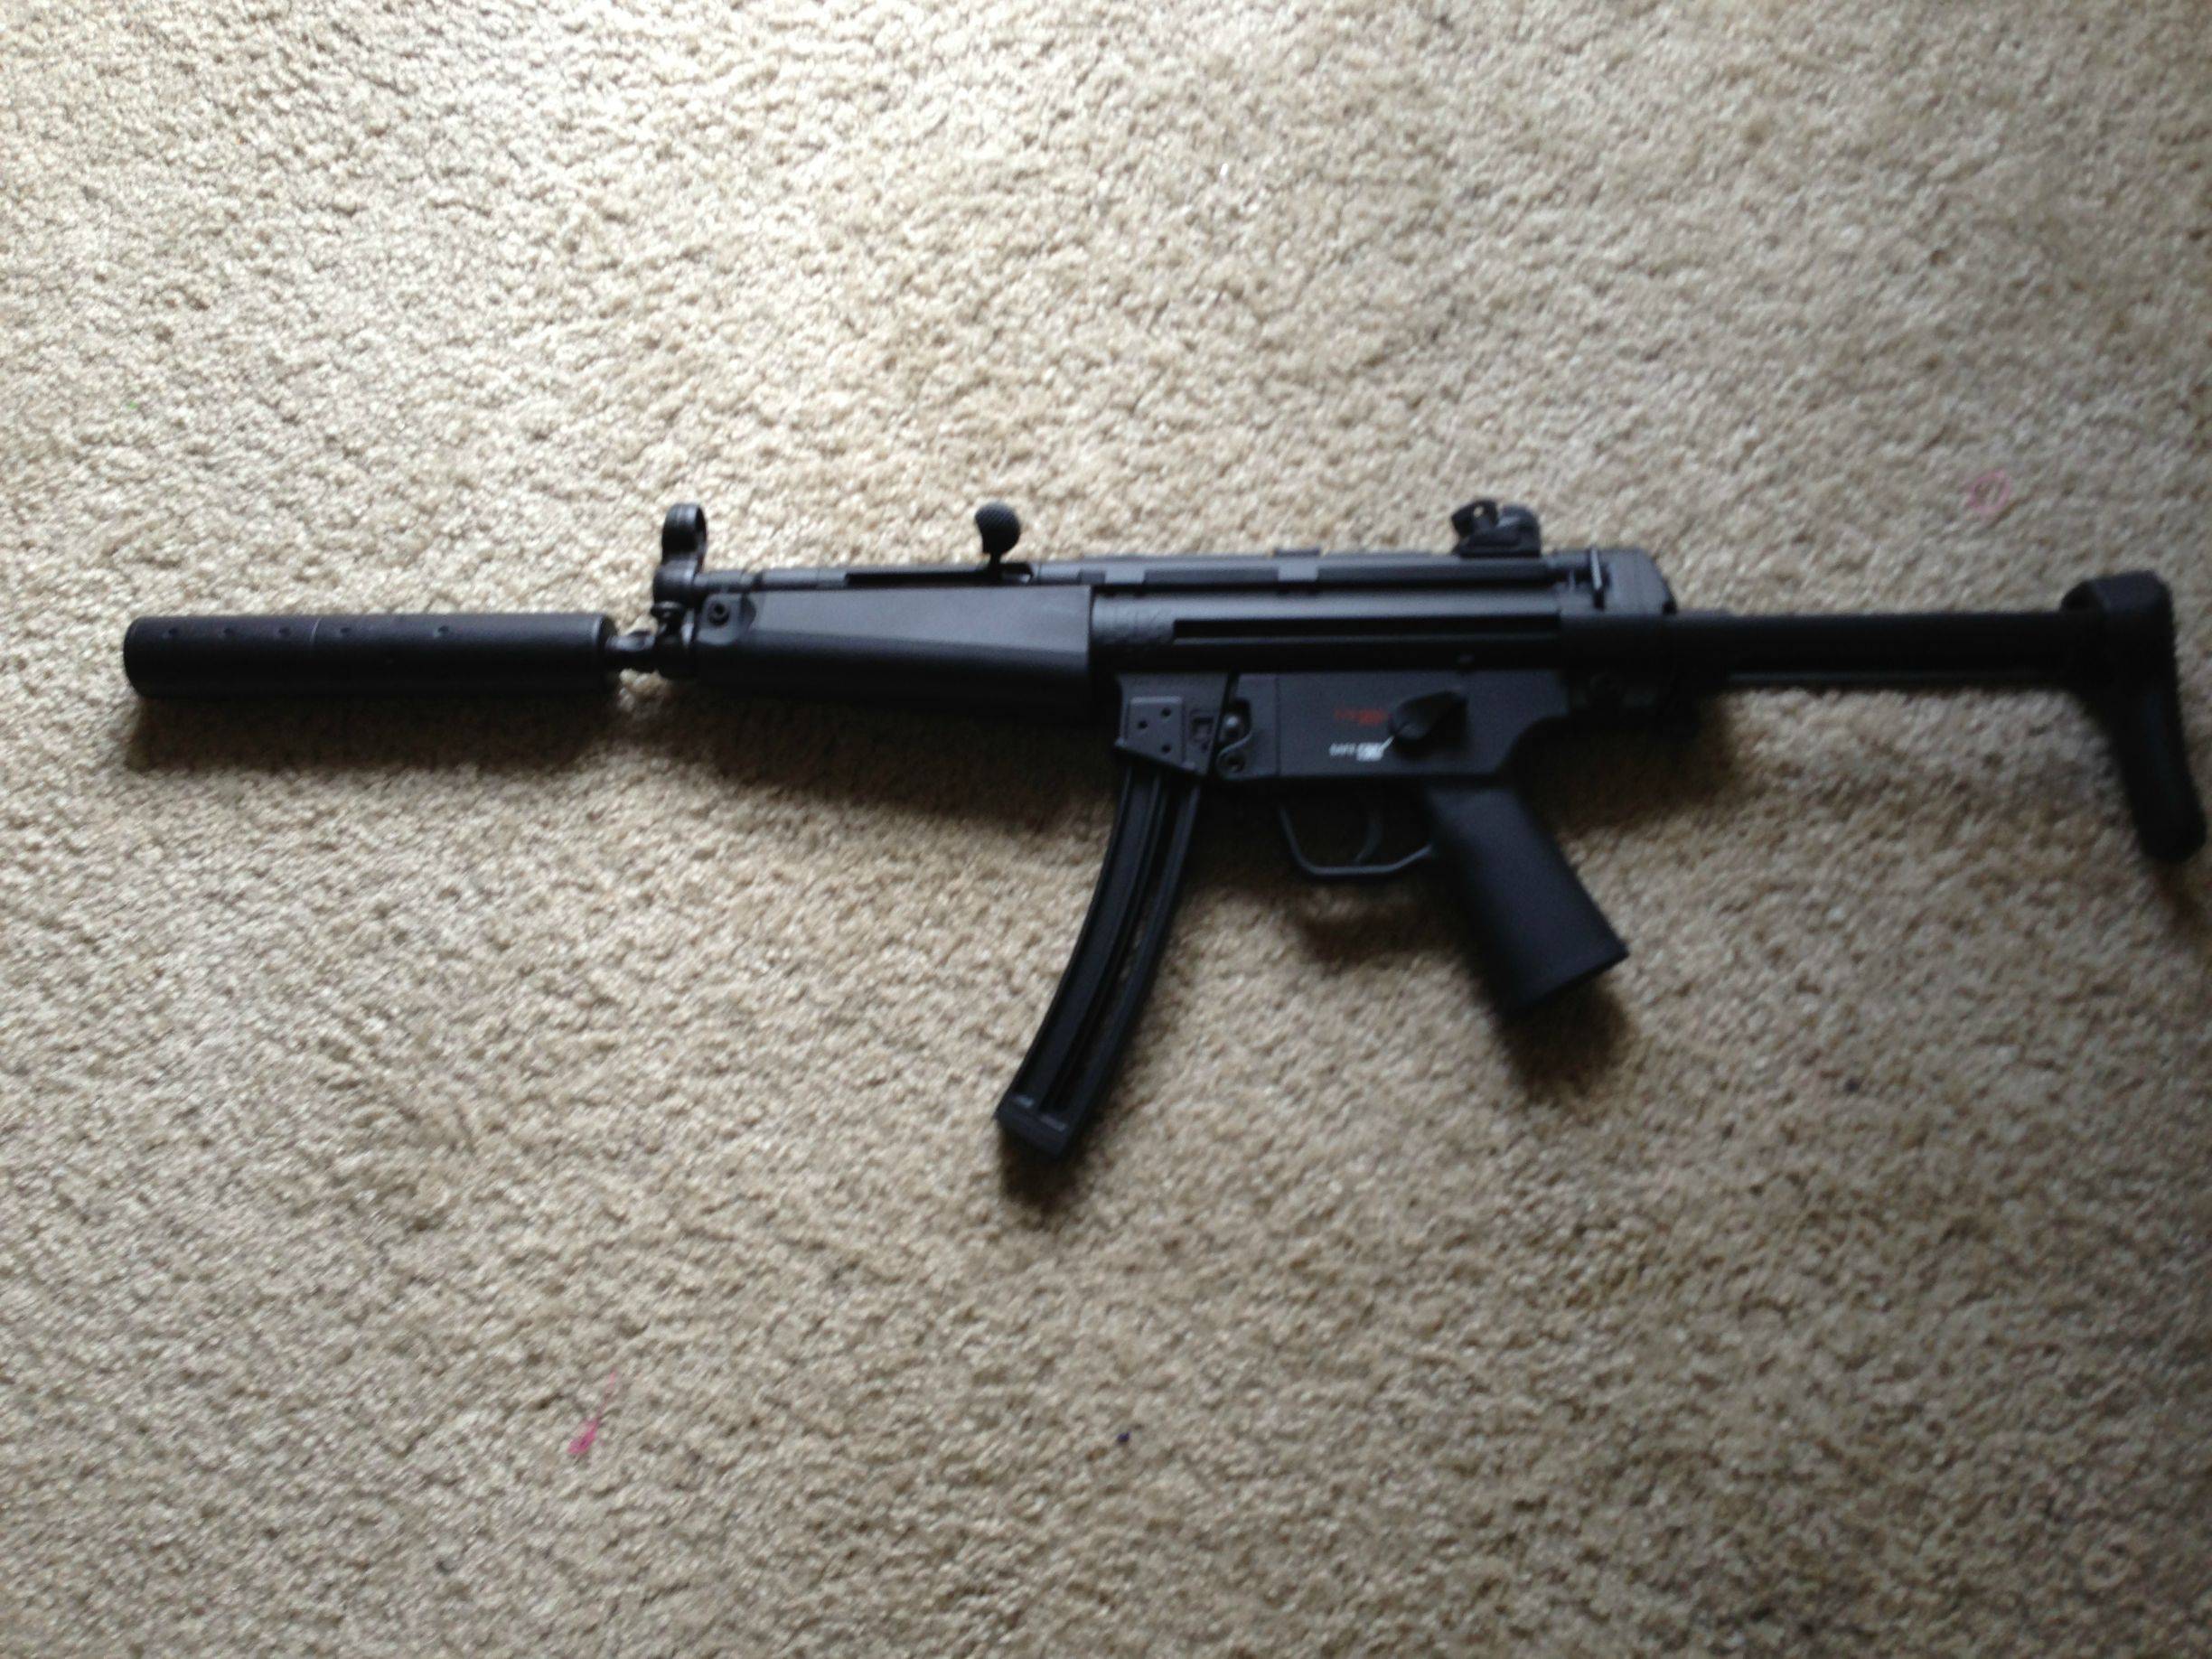 I have an H&K MP5-SD clone chambered in .22LR, this is a BLAST to shoot...